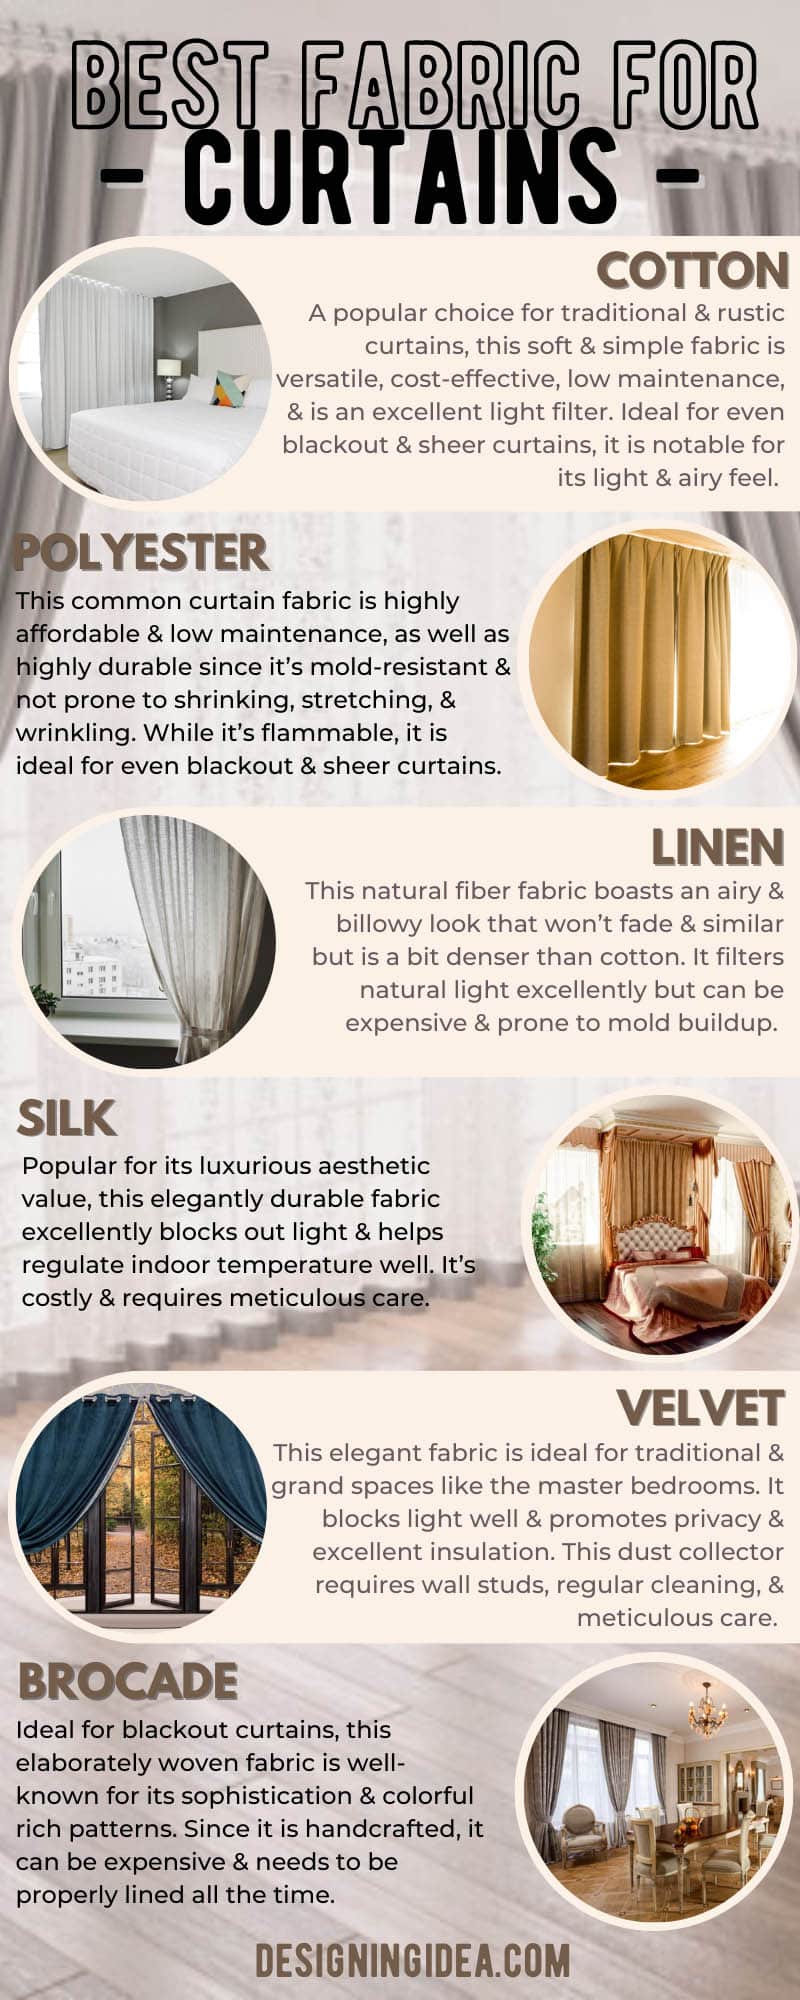 Best fabric for curtains infographic